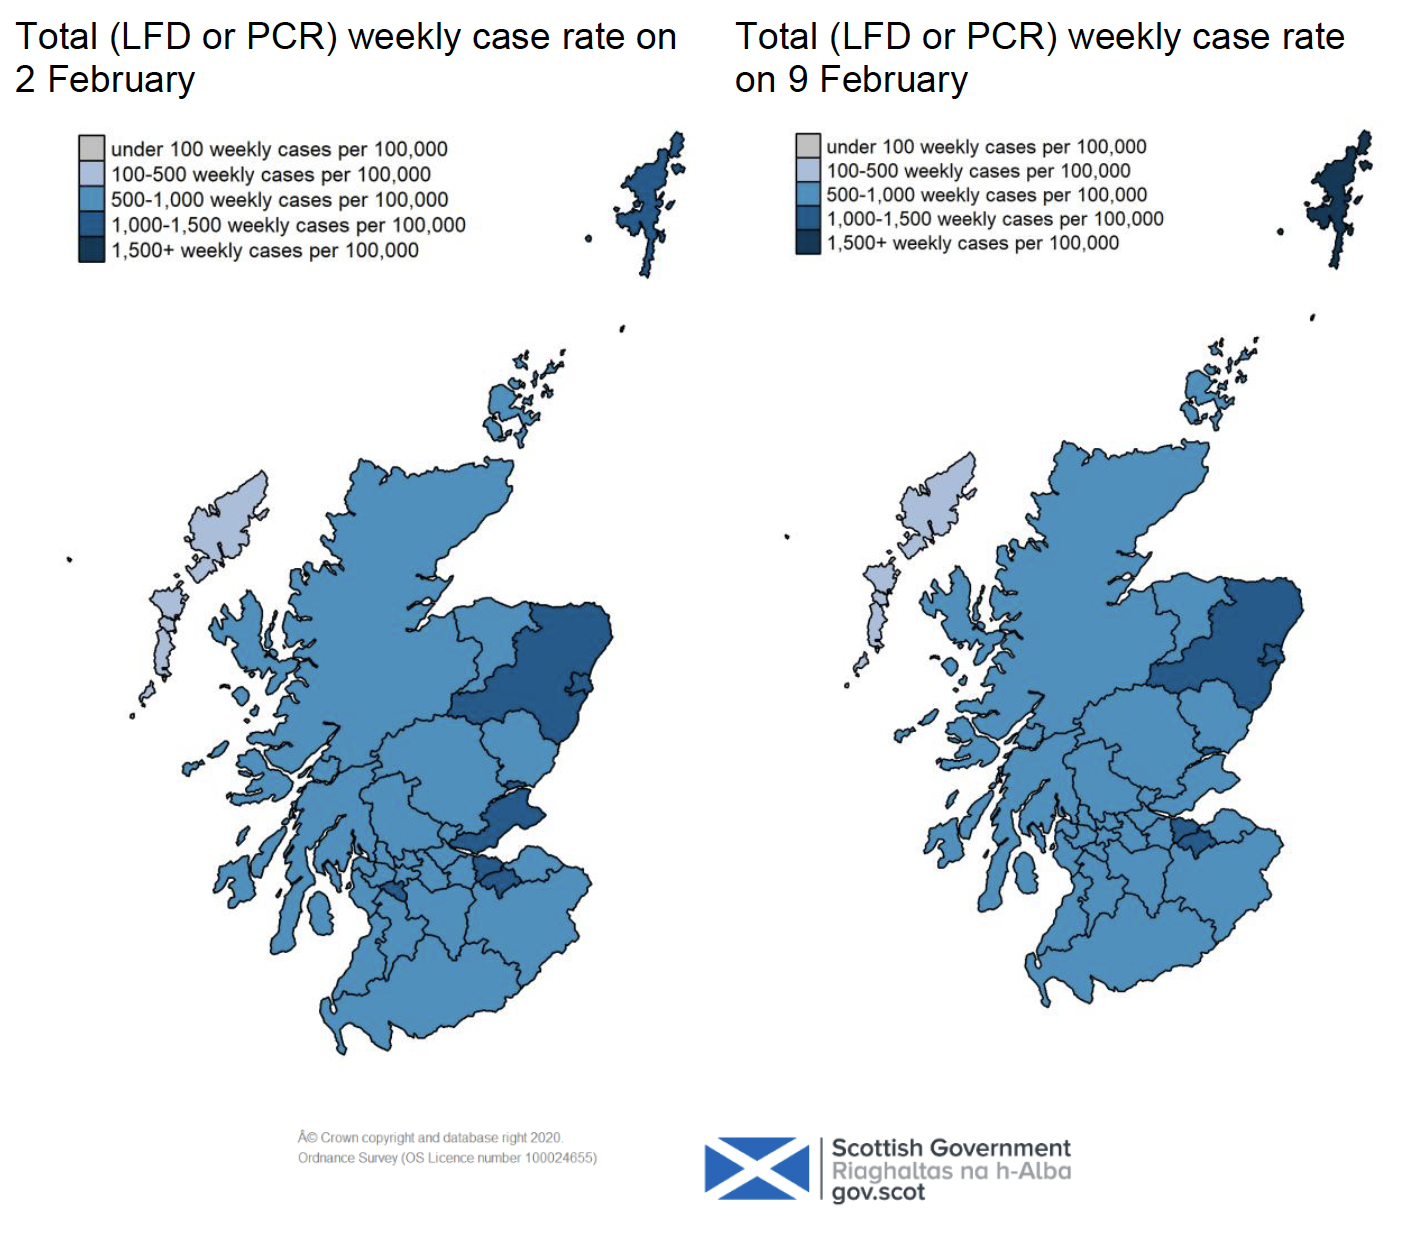 two colour coded maps, the left one showing the new positive total LFD or PCR weekly cases per 100,000 people by reporting date in each local authority in Scotland on 2 February 2022, and the right one showing the same for 9 February 2022. The maps range from grey for under 100 weekly cases per 100,000, through very light blue for 100-500, blue for 500-1,000, darker blue for 1,000-1,500, and very dark blue for over 1,500 weekly cases per 100,000 people. 